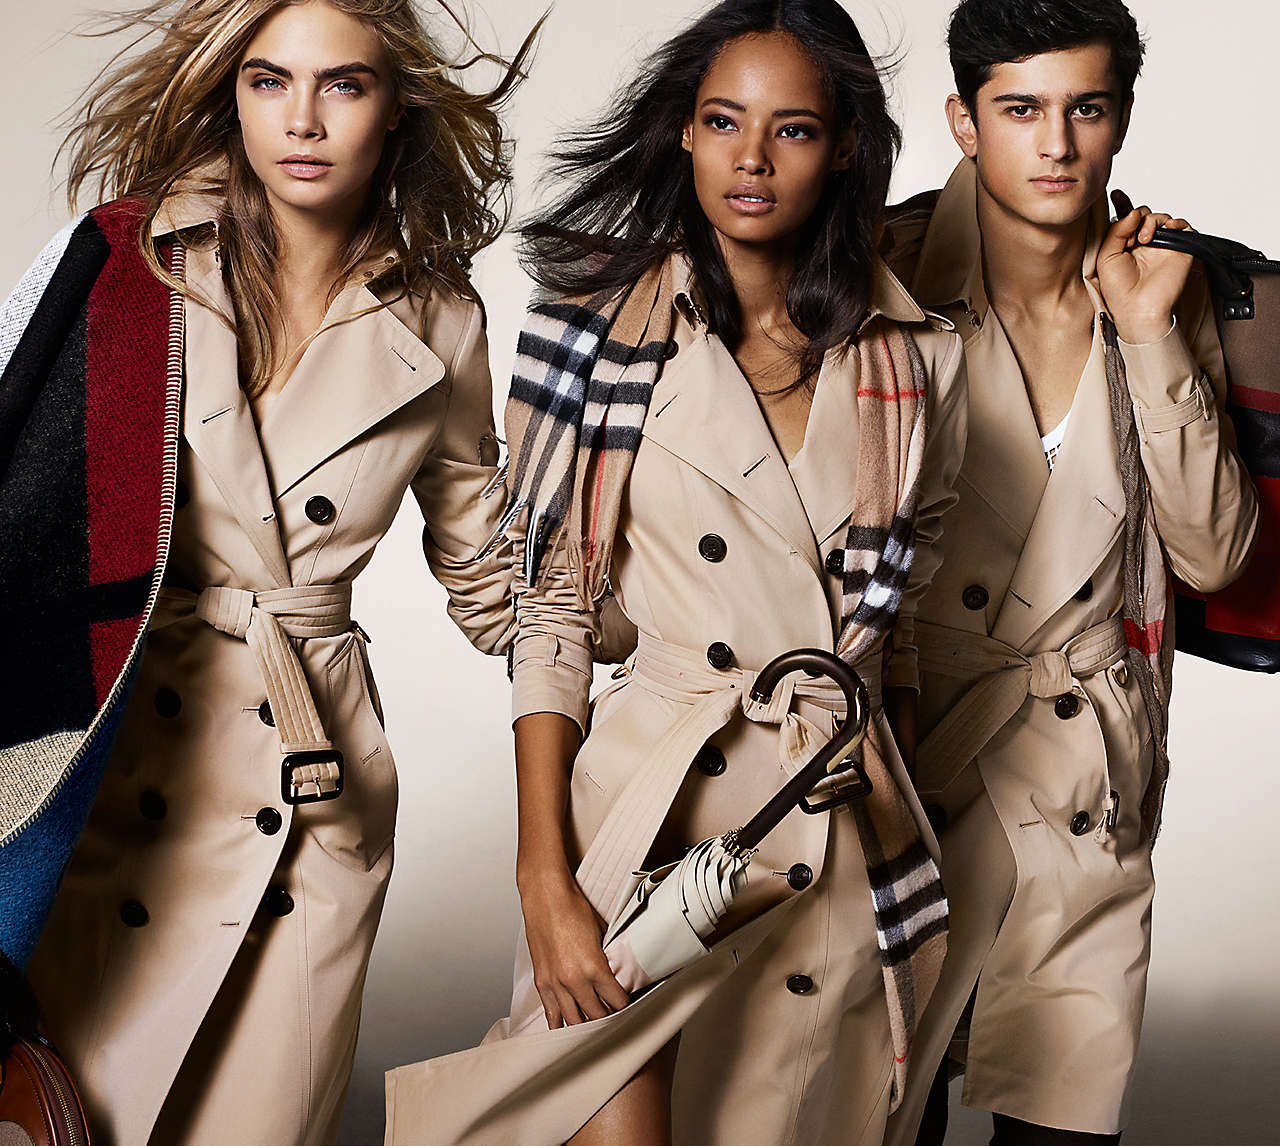 the art of trench burberry